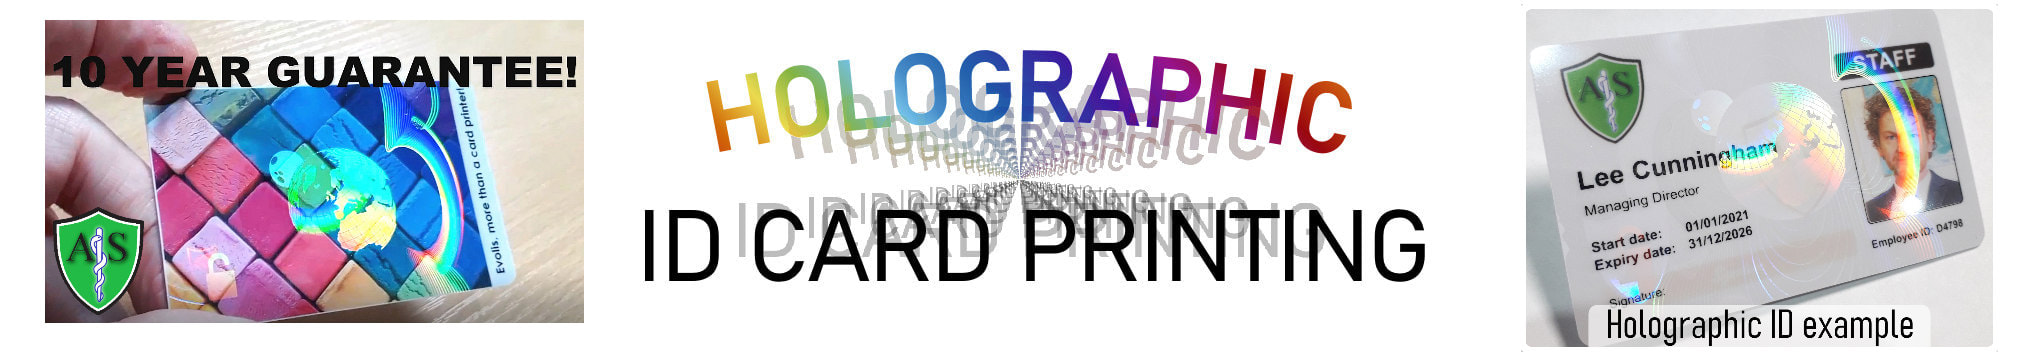 Southampton holographic ID card print service. Employee Identity cards with hologram or holograph security mark.